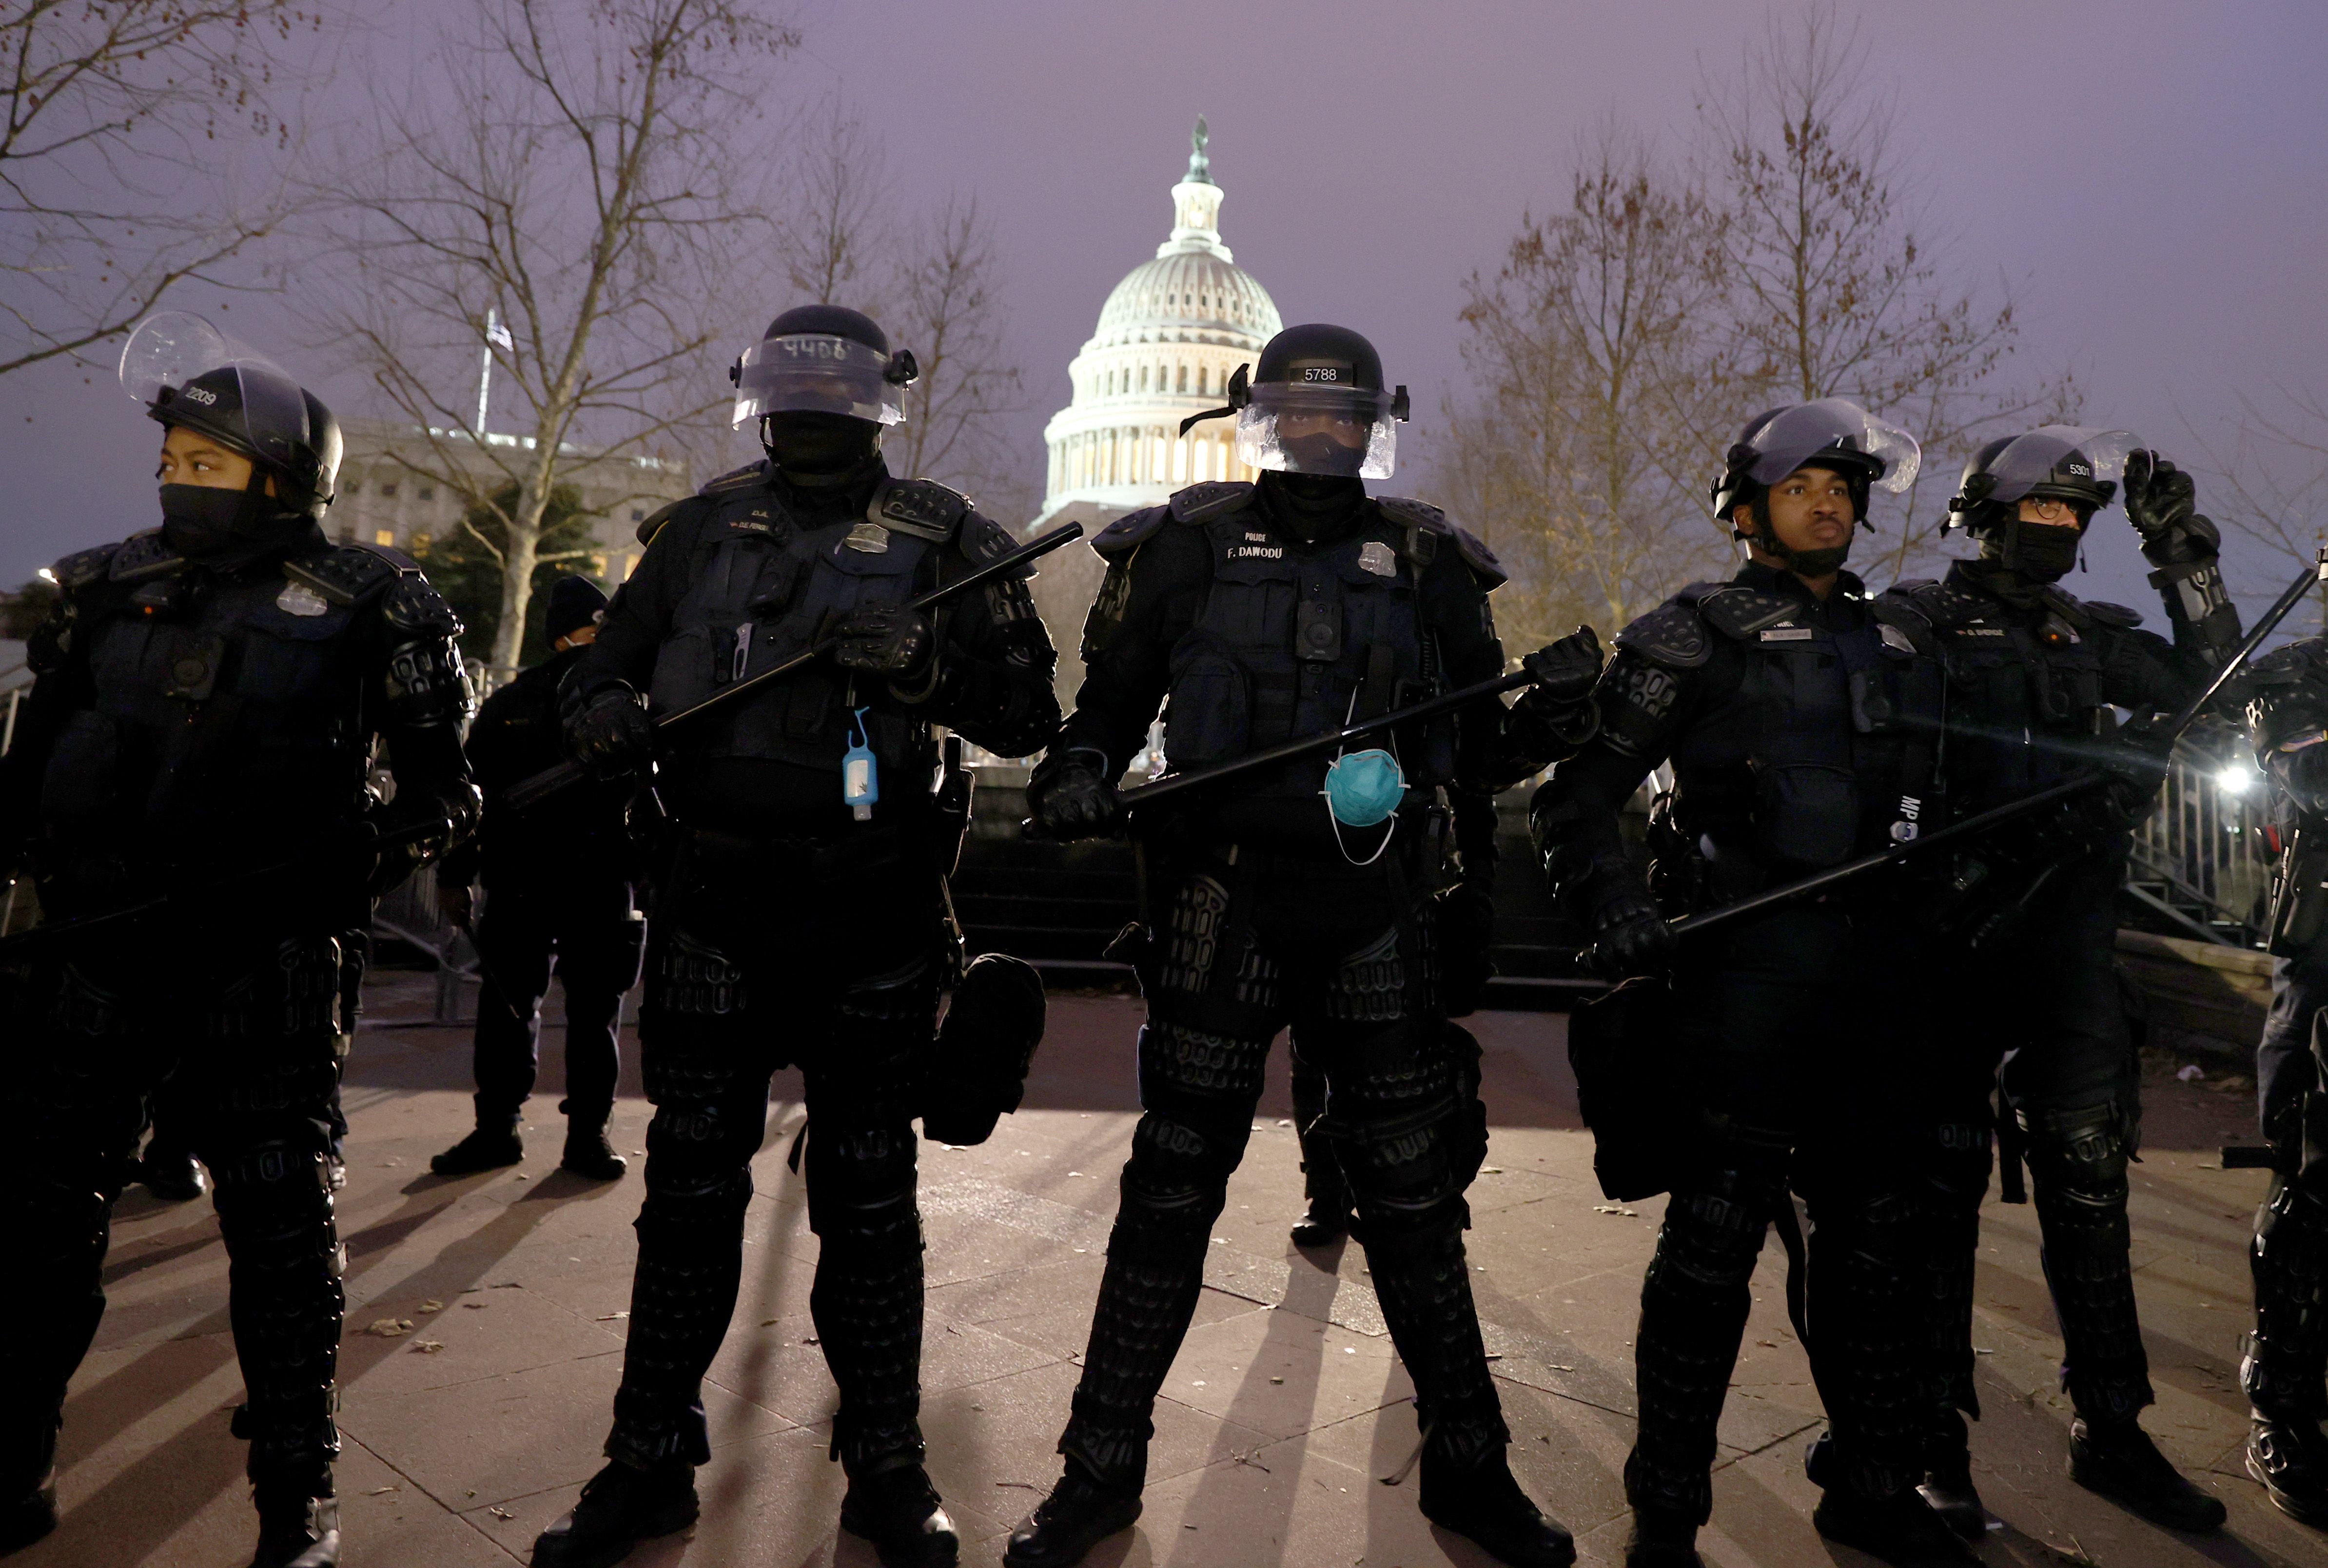 Police officers in riot gear line up as protesters gather on the U.S. Capitol Building on January 06, 2021 in Washington, DC